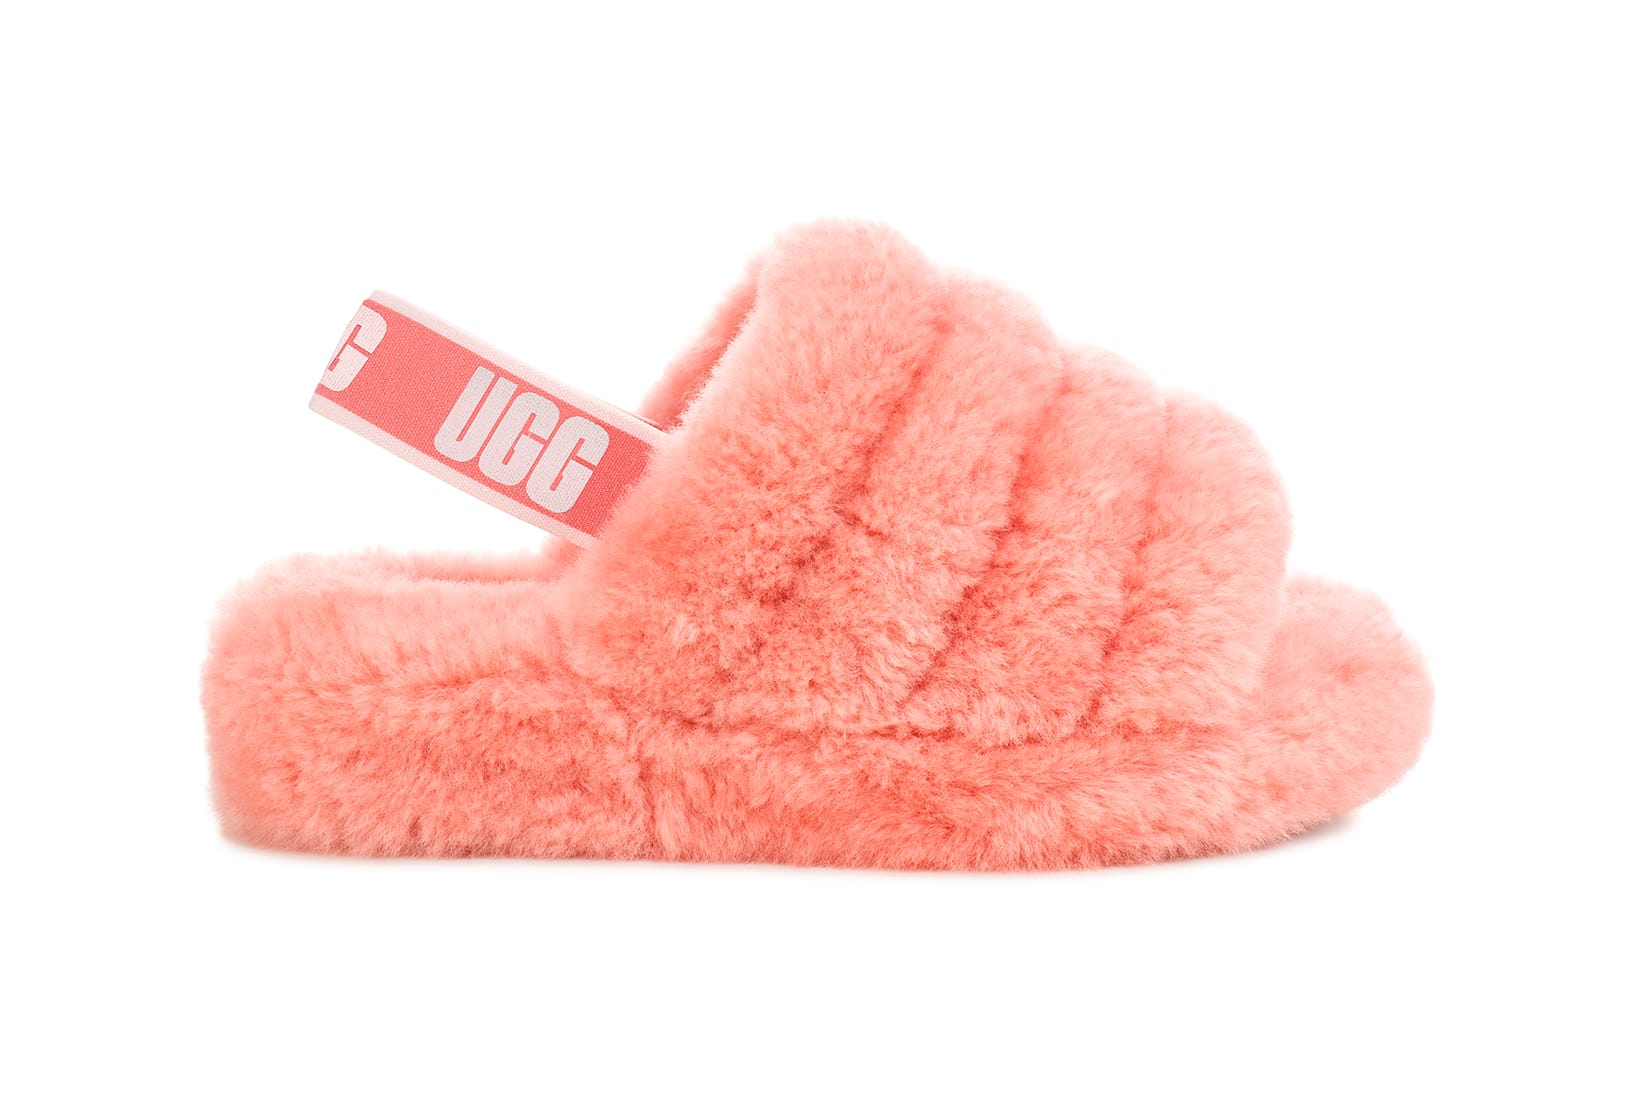 Dorakitten Women Furry Slippers Soft Pom Ball Faux Fur Slippers Fluffy  Sandals House Shoes for Indoor Outdoor : Amazon.in: Shoes & Handbags